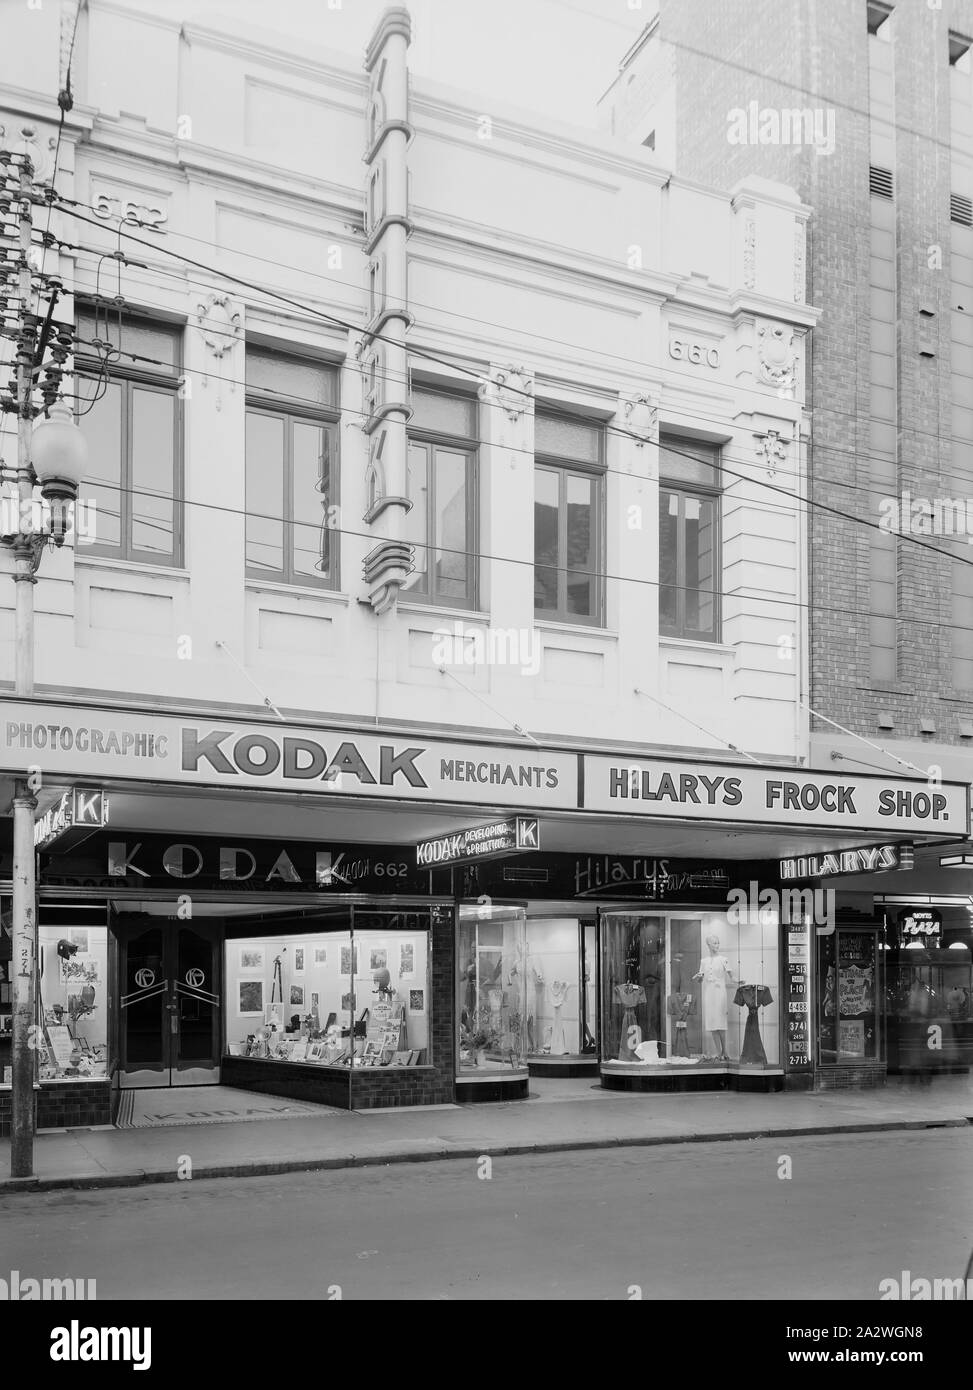 Negative, Shop Exterior, Perth, Western Australia, circa 1940s, Black and white film negative of the Kodak Australasia Pty Ltd branch store at 662 Hay Street, Perth, Western Australia, taken in the 1940s. This street view shows the Kodak shop front displays of photographs and photographic products, and the windows of neighbouring Hilary's Frock shop. collection of products, promotional materials, photographs and working life Stock Photo